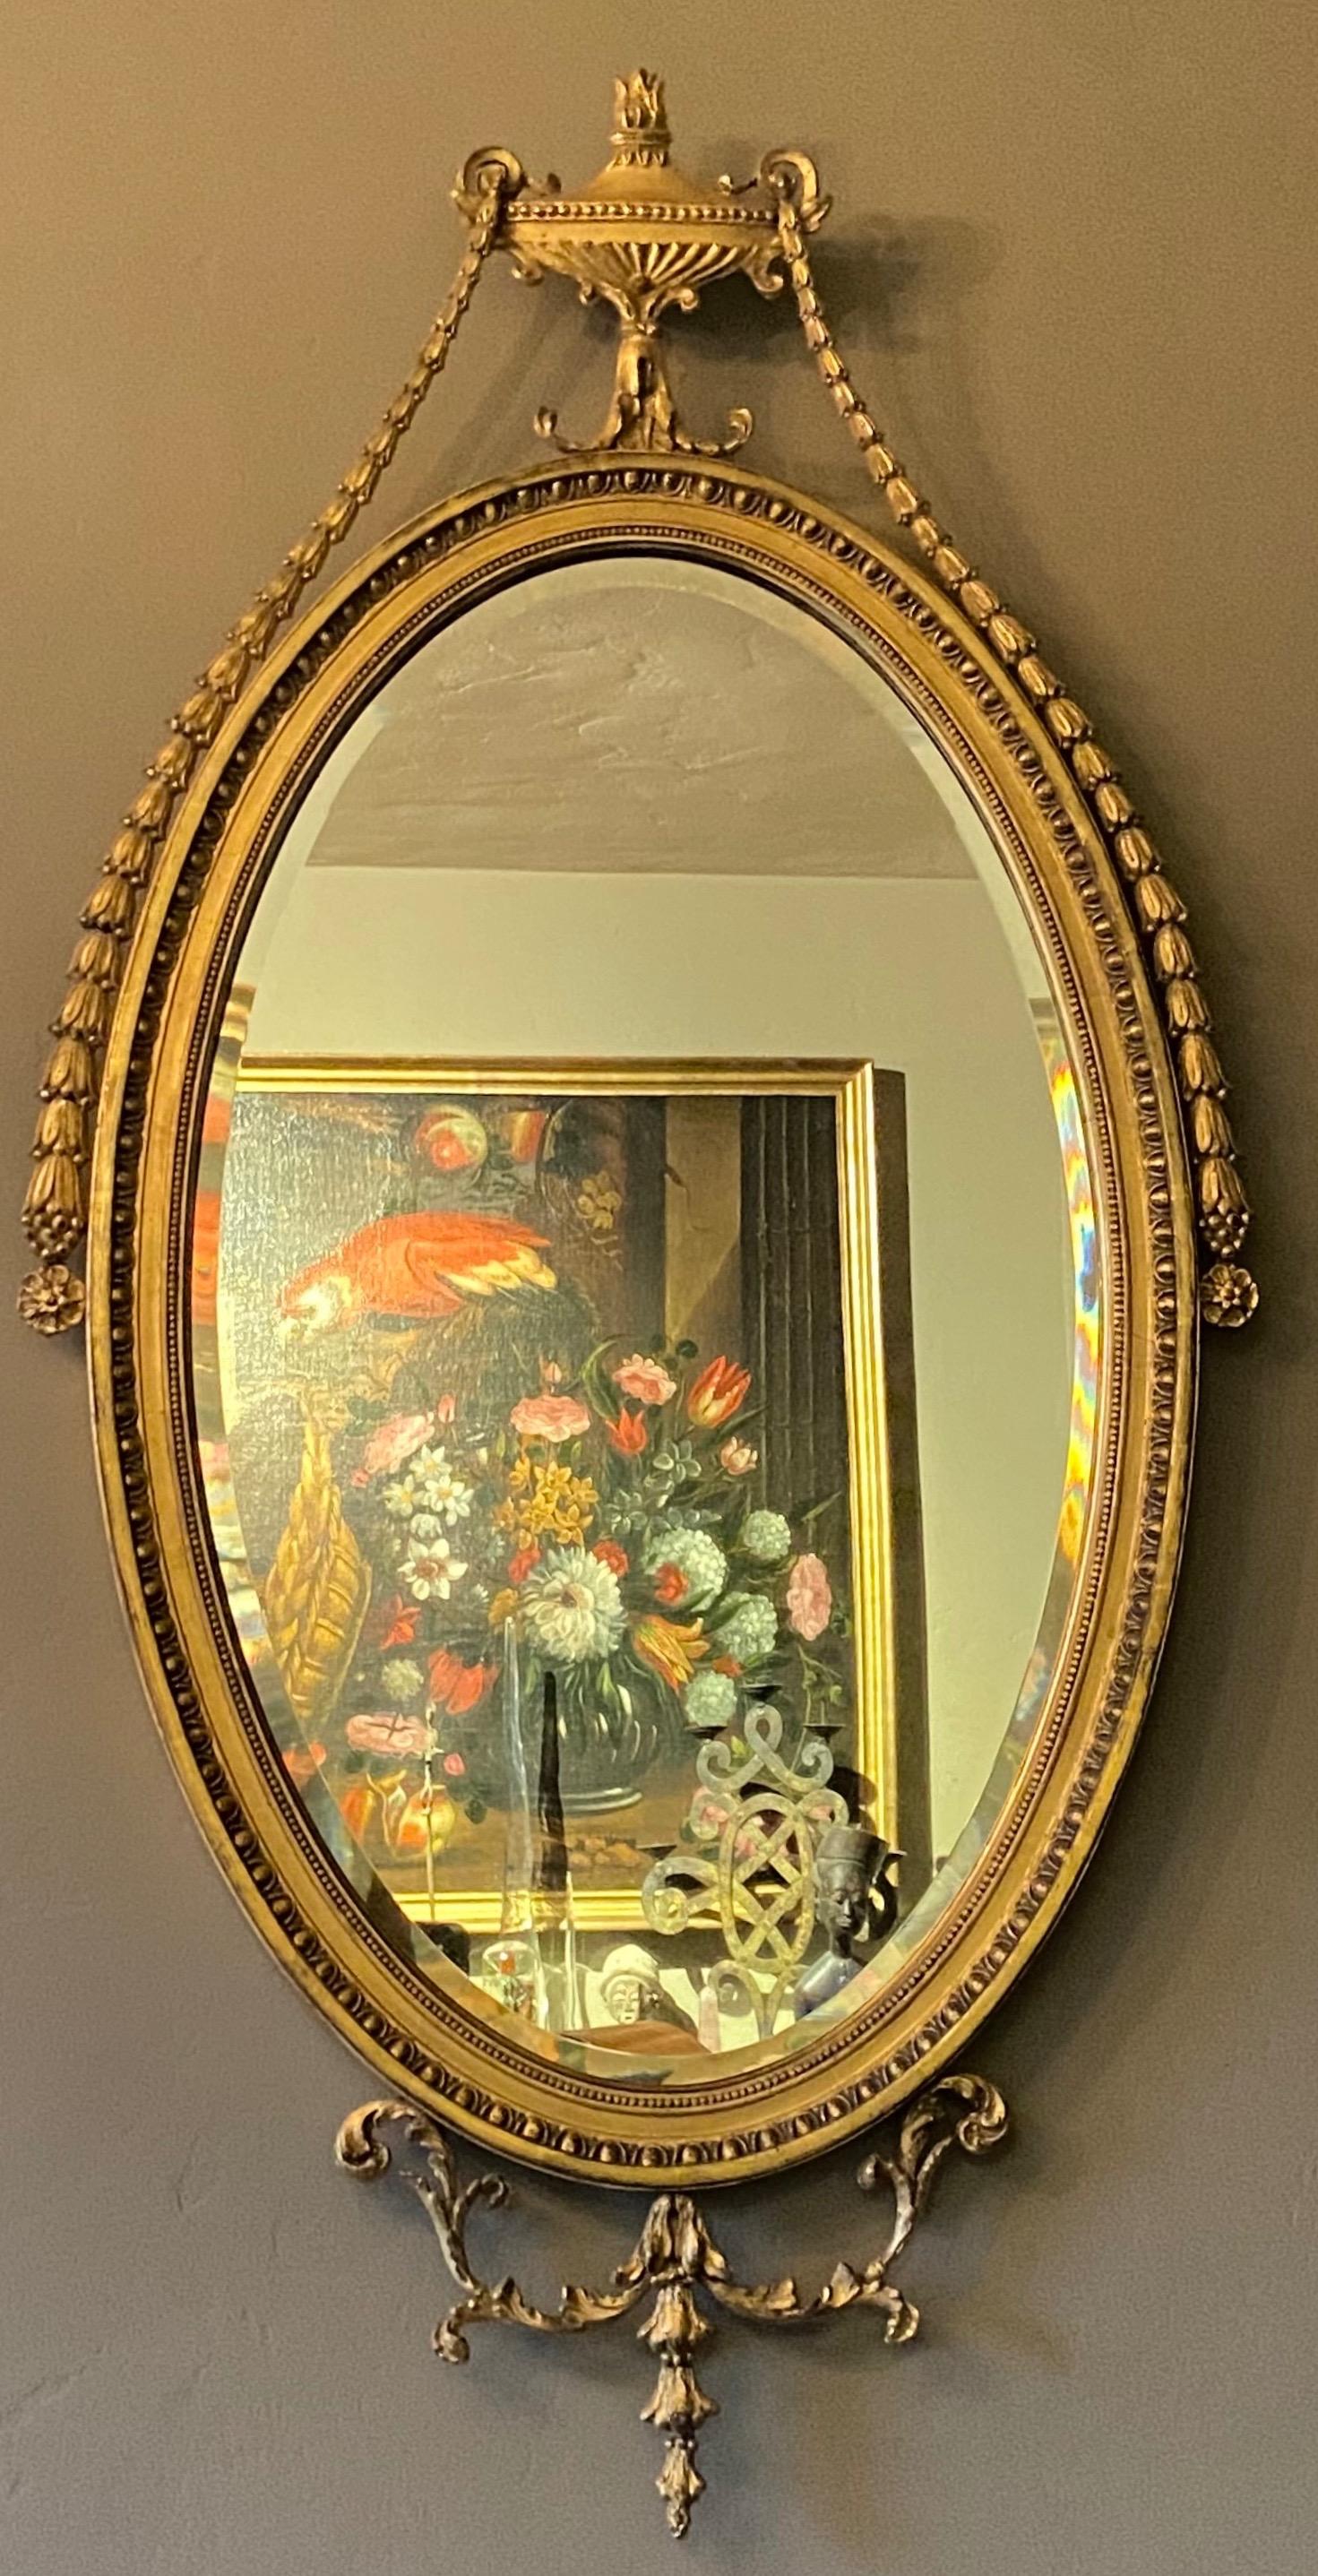 English Adam style gilt wood wall mirror with carved and cast oval frame, having an urn decoration at the top pediment with garland swags and flower spray.
High quality in excellent condition.
1st quarter 20th century.
We have another matching